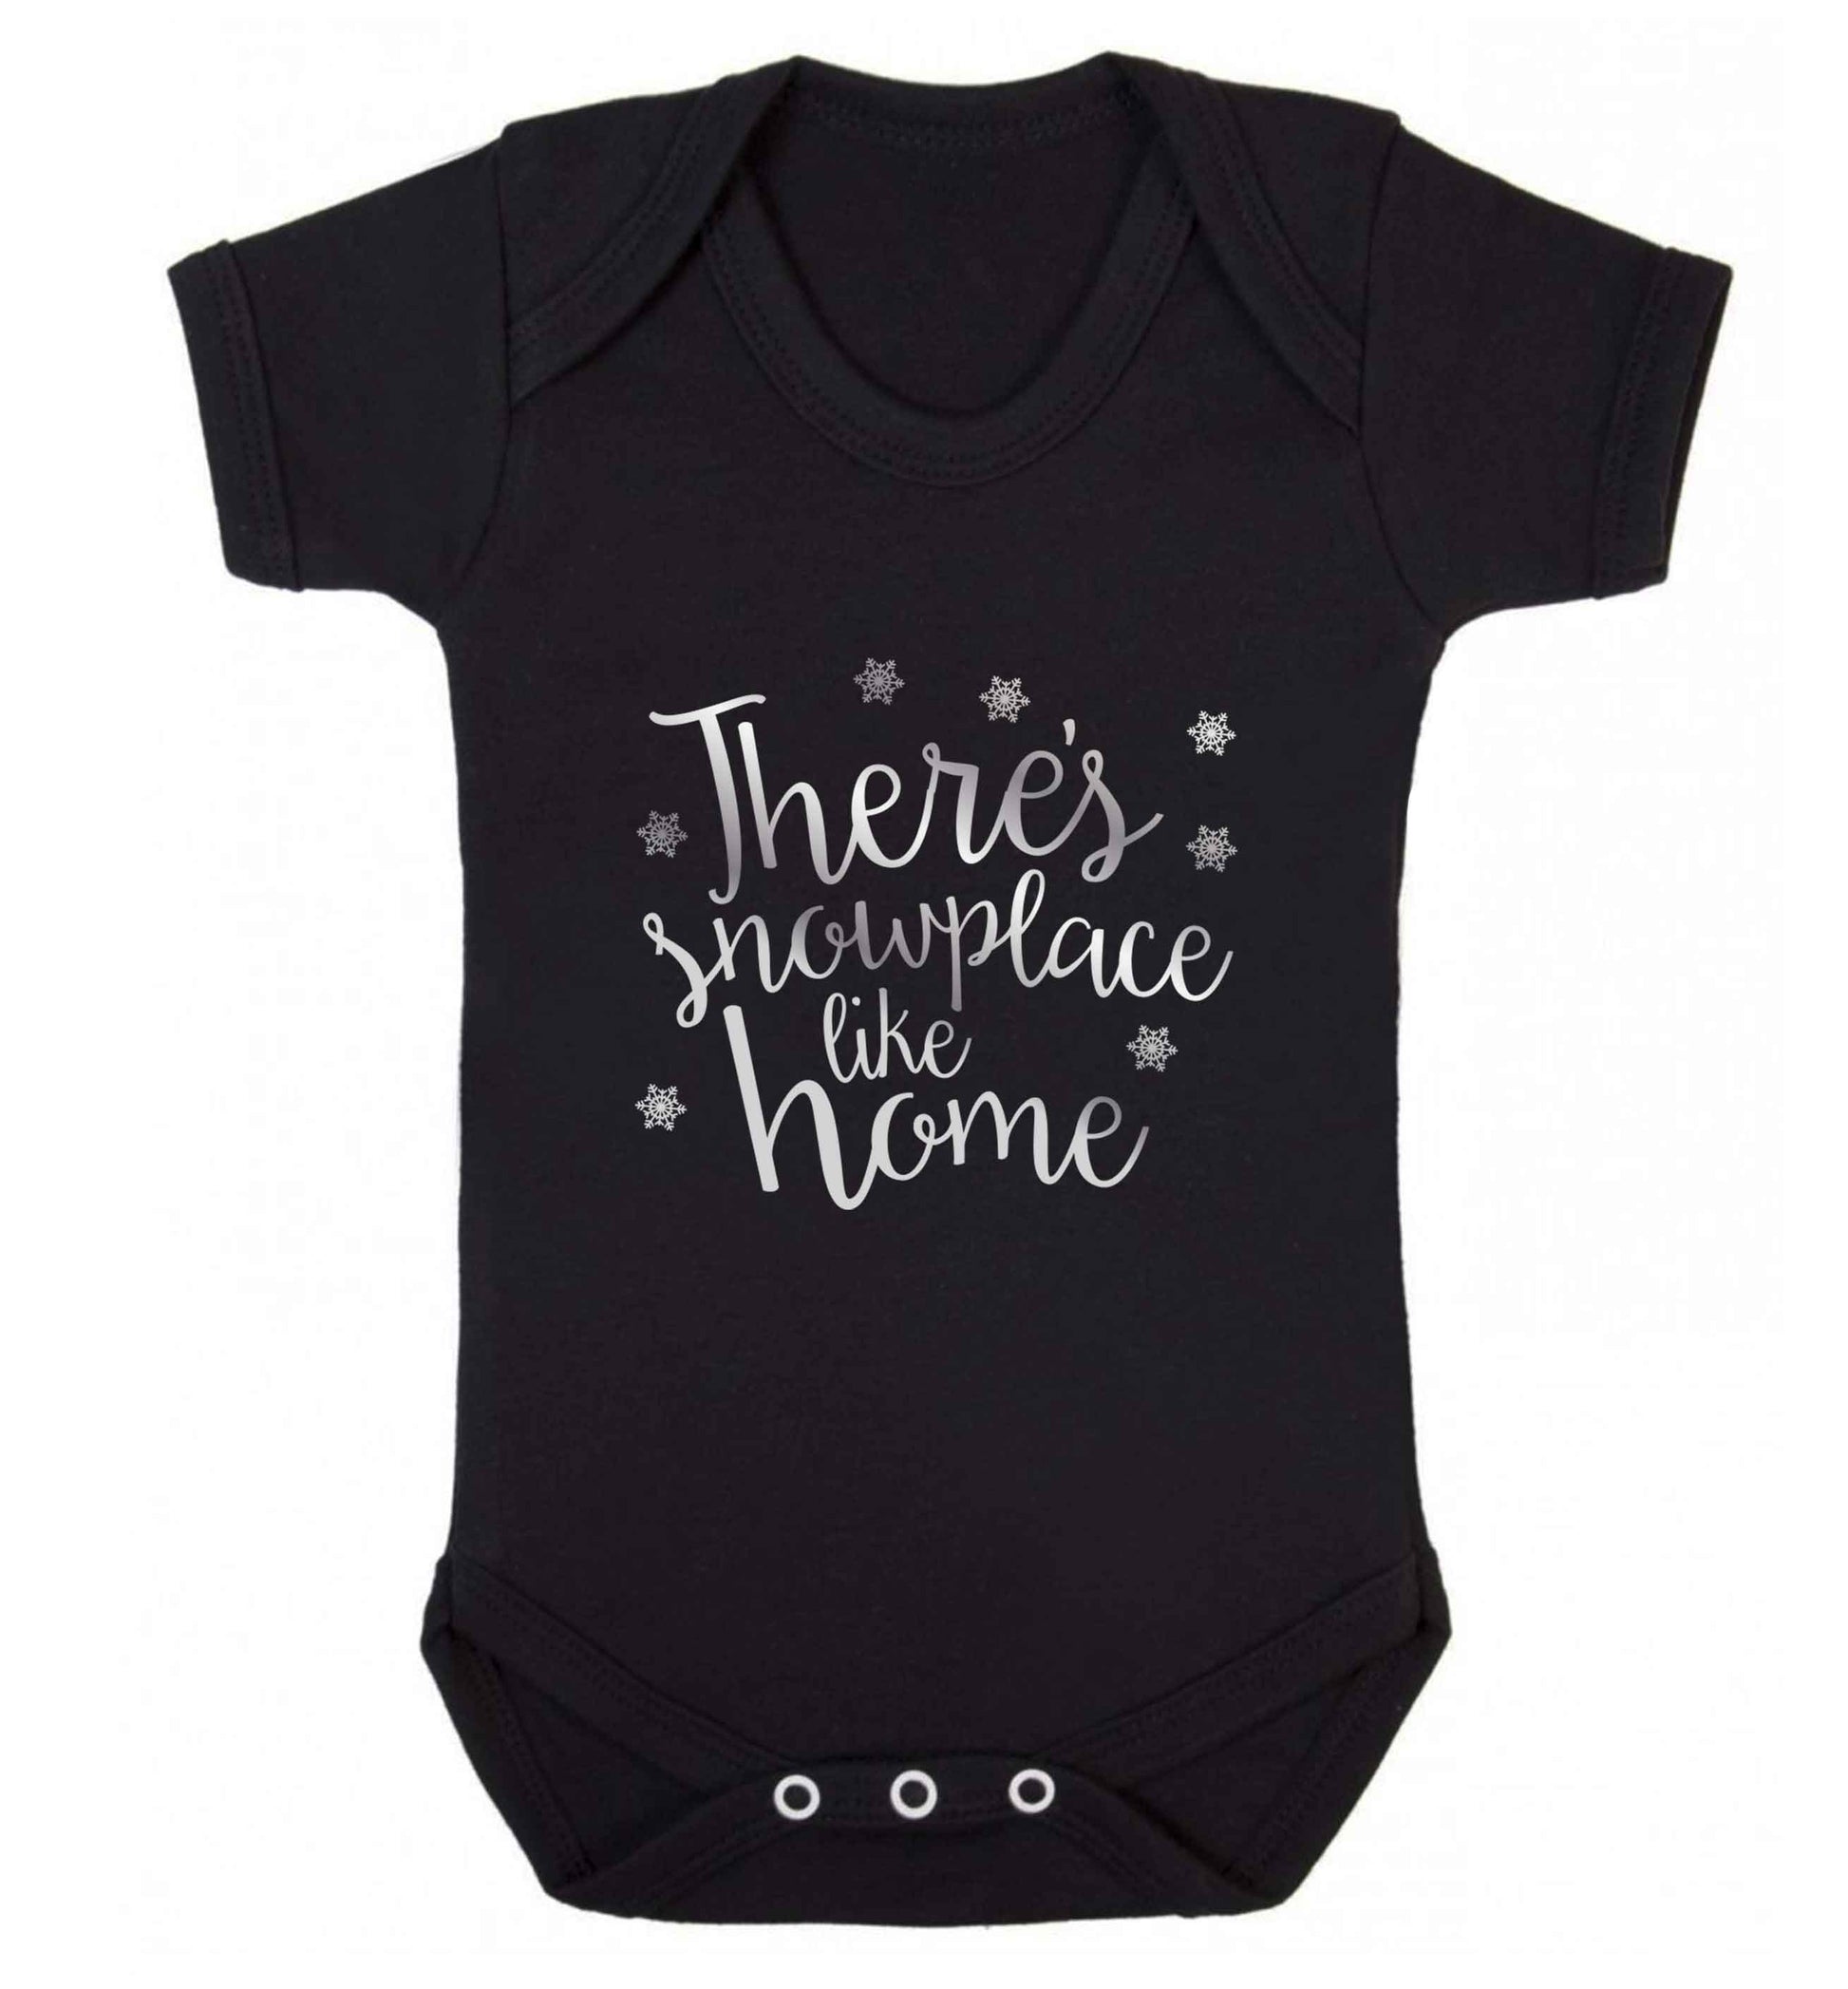 There's snowplace like home - metallic silver baby vest black 18-24 months